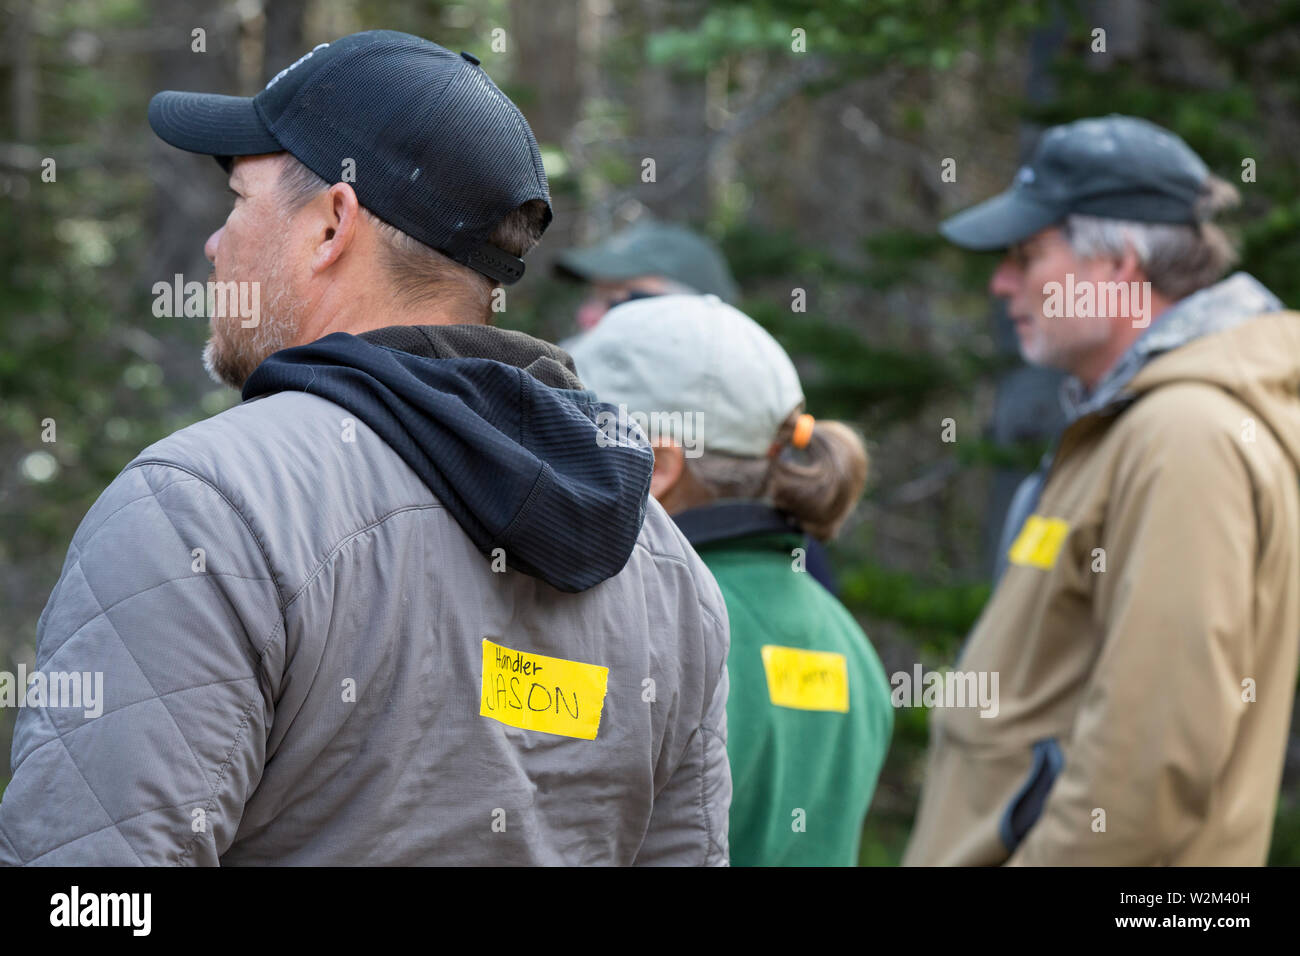 Rangers, employees and volunteers at the staging area at Hurricane Ridge in Olympic National Park, Washington on July 9, 2019. Today is the second day of a two-week long capture and translocation process moving mountain goats from Olympic National Park to the northern Cascade Mountains. The effort is a collaboration between the National Park Service, the Washington Department of Fish & Wildlife and the USDA Forest Service to re-establish depleted populations of mountain goats in the Northern Cascades while also removing non-native goats from the Olympic Mountains. The animals were introduced t Stock Photo